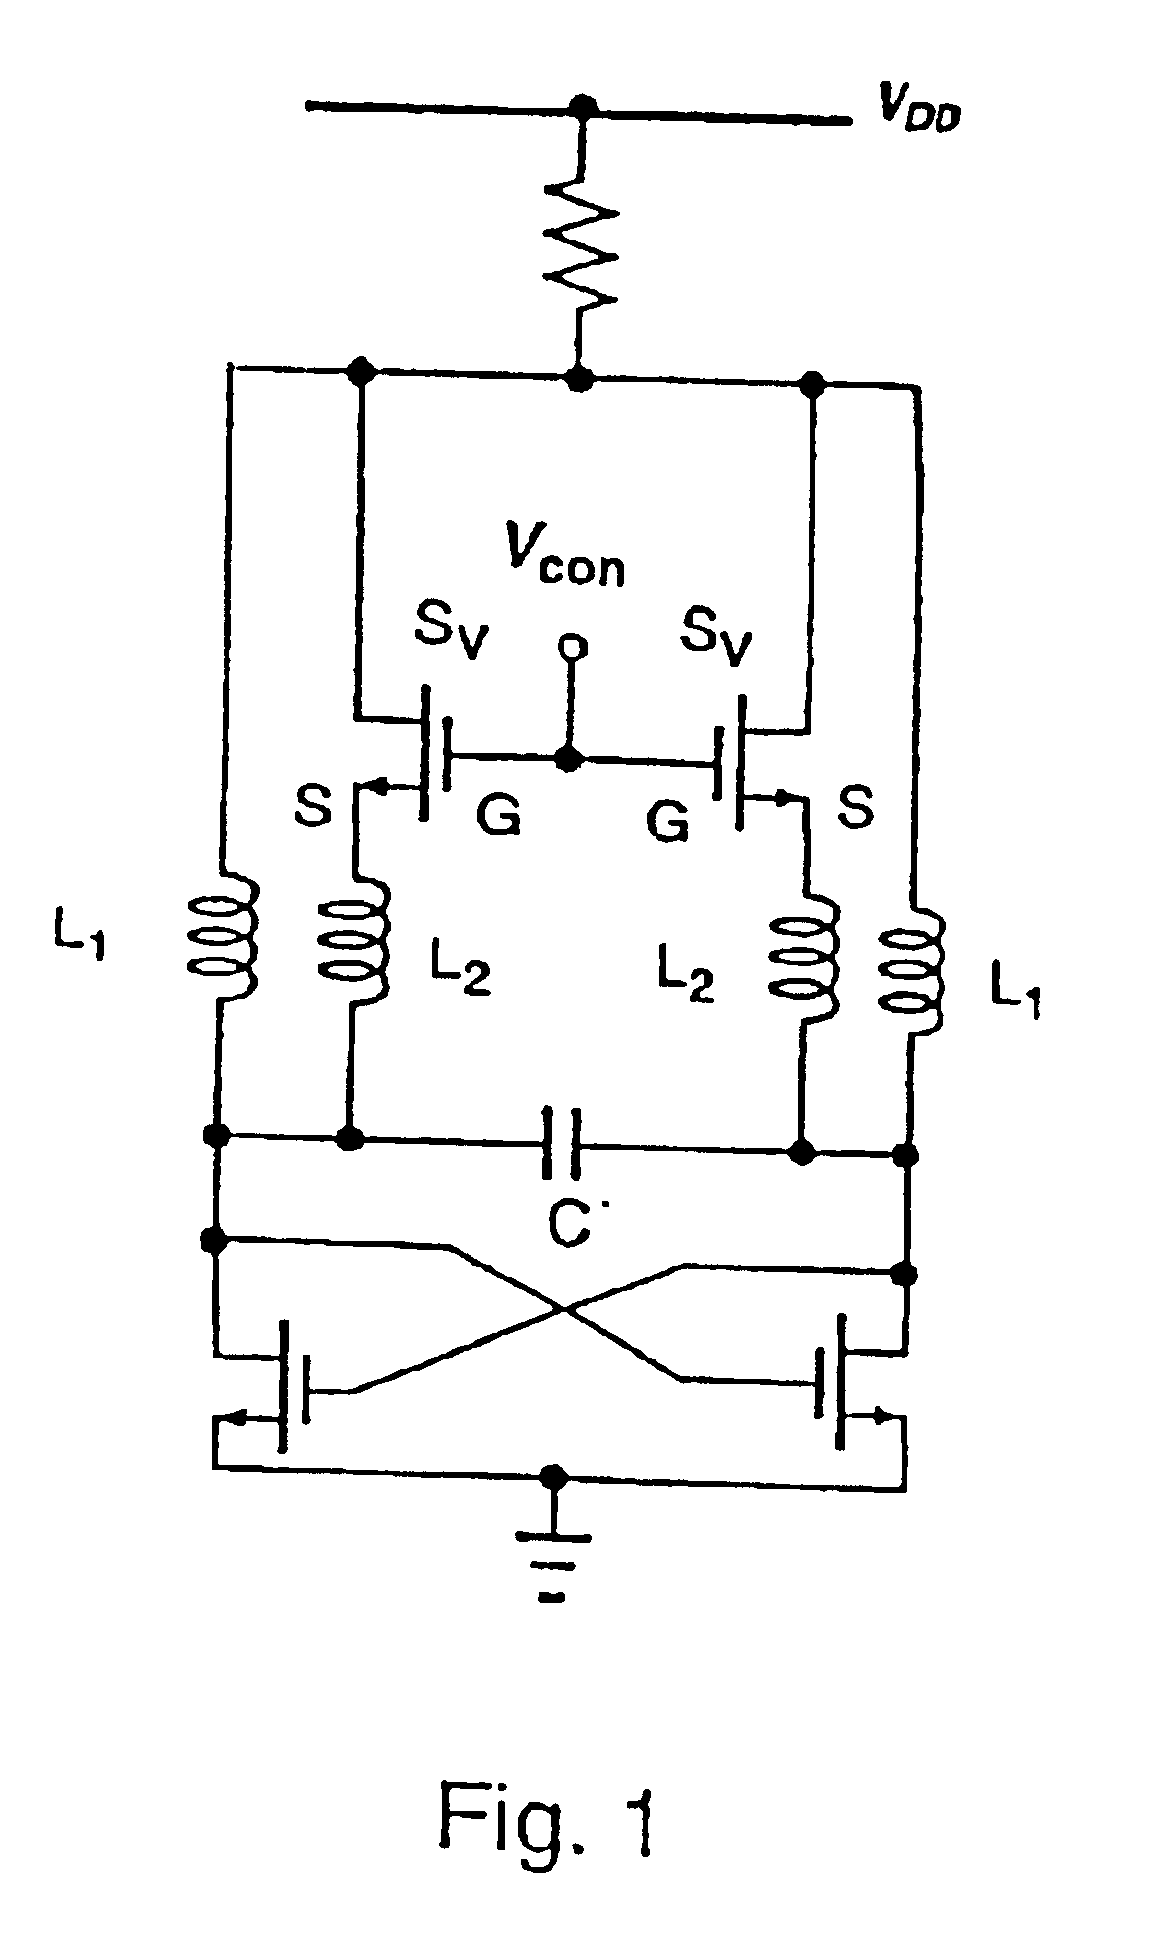 Voltage-controlled oscillator with LC resonant circuit